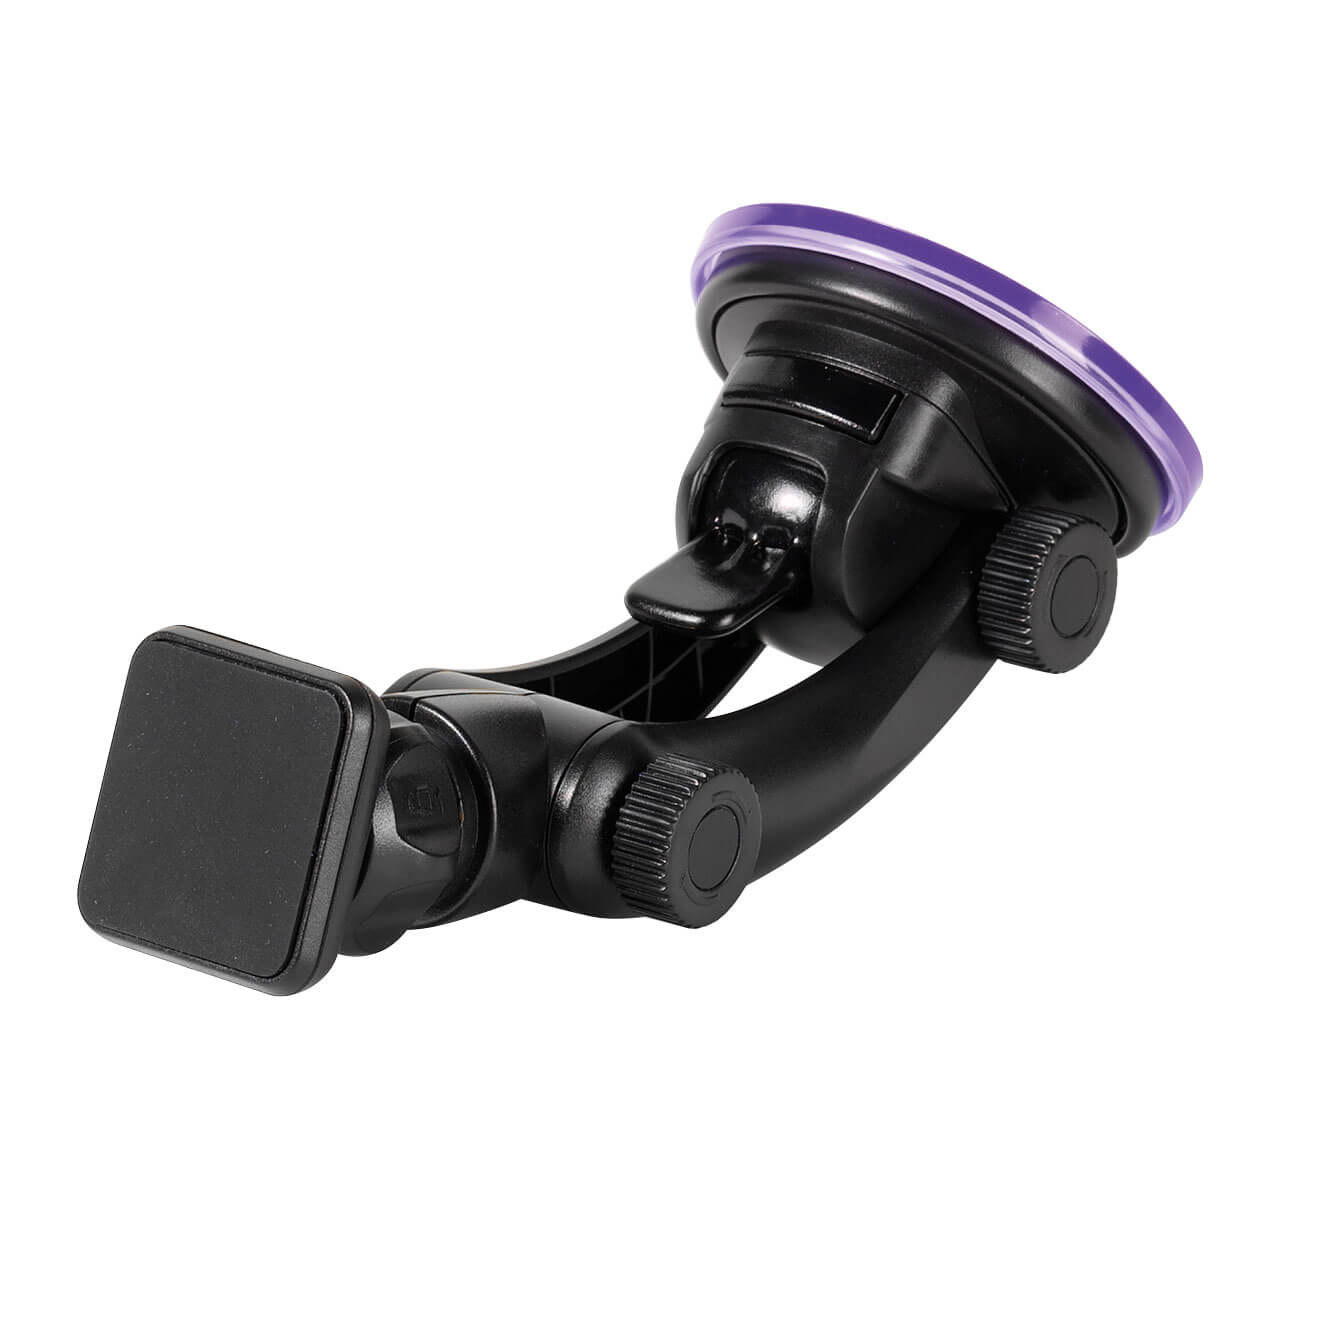 Wizard, magnetic Car Holder with suction cup for Smartphones - Vivanco